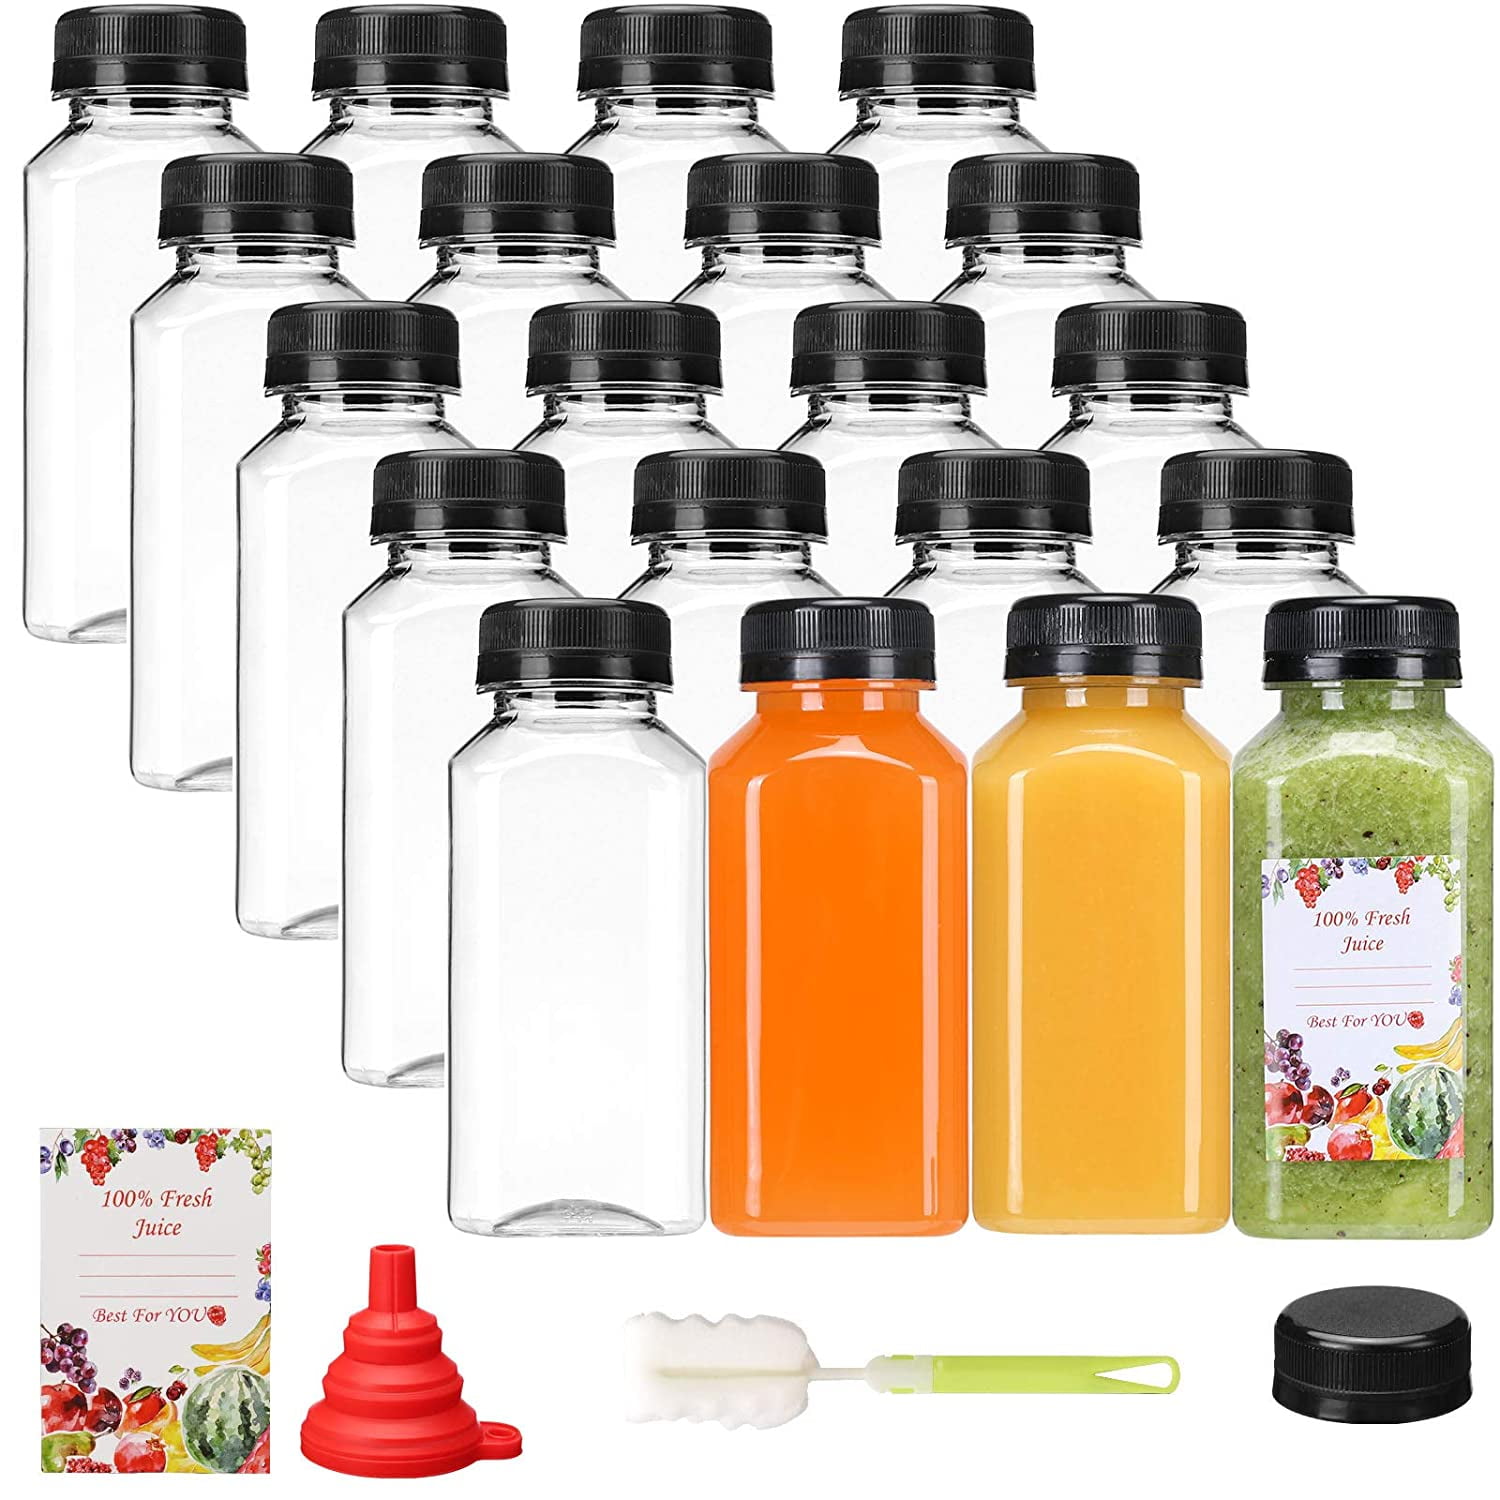 SUPERLELE 20pcs 8oz Plastic Juice Bottles with Caps, Empty Clear Reusable  Plastic Bottles with Black Tamper Evident Lids for Juicing, Smoothie,  Protein Drinks and Other Beverage Containers 